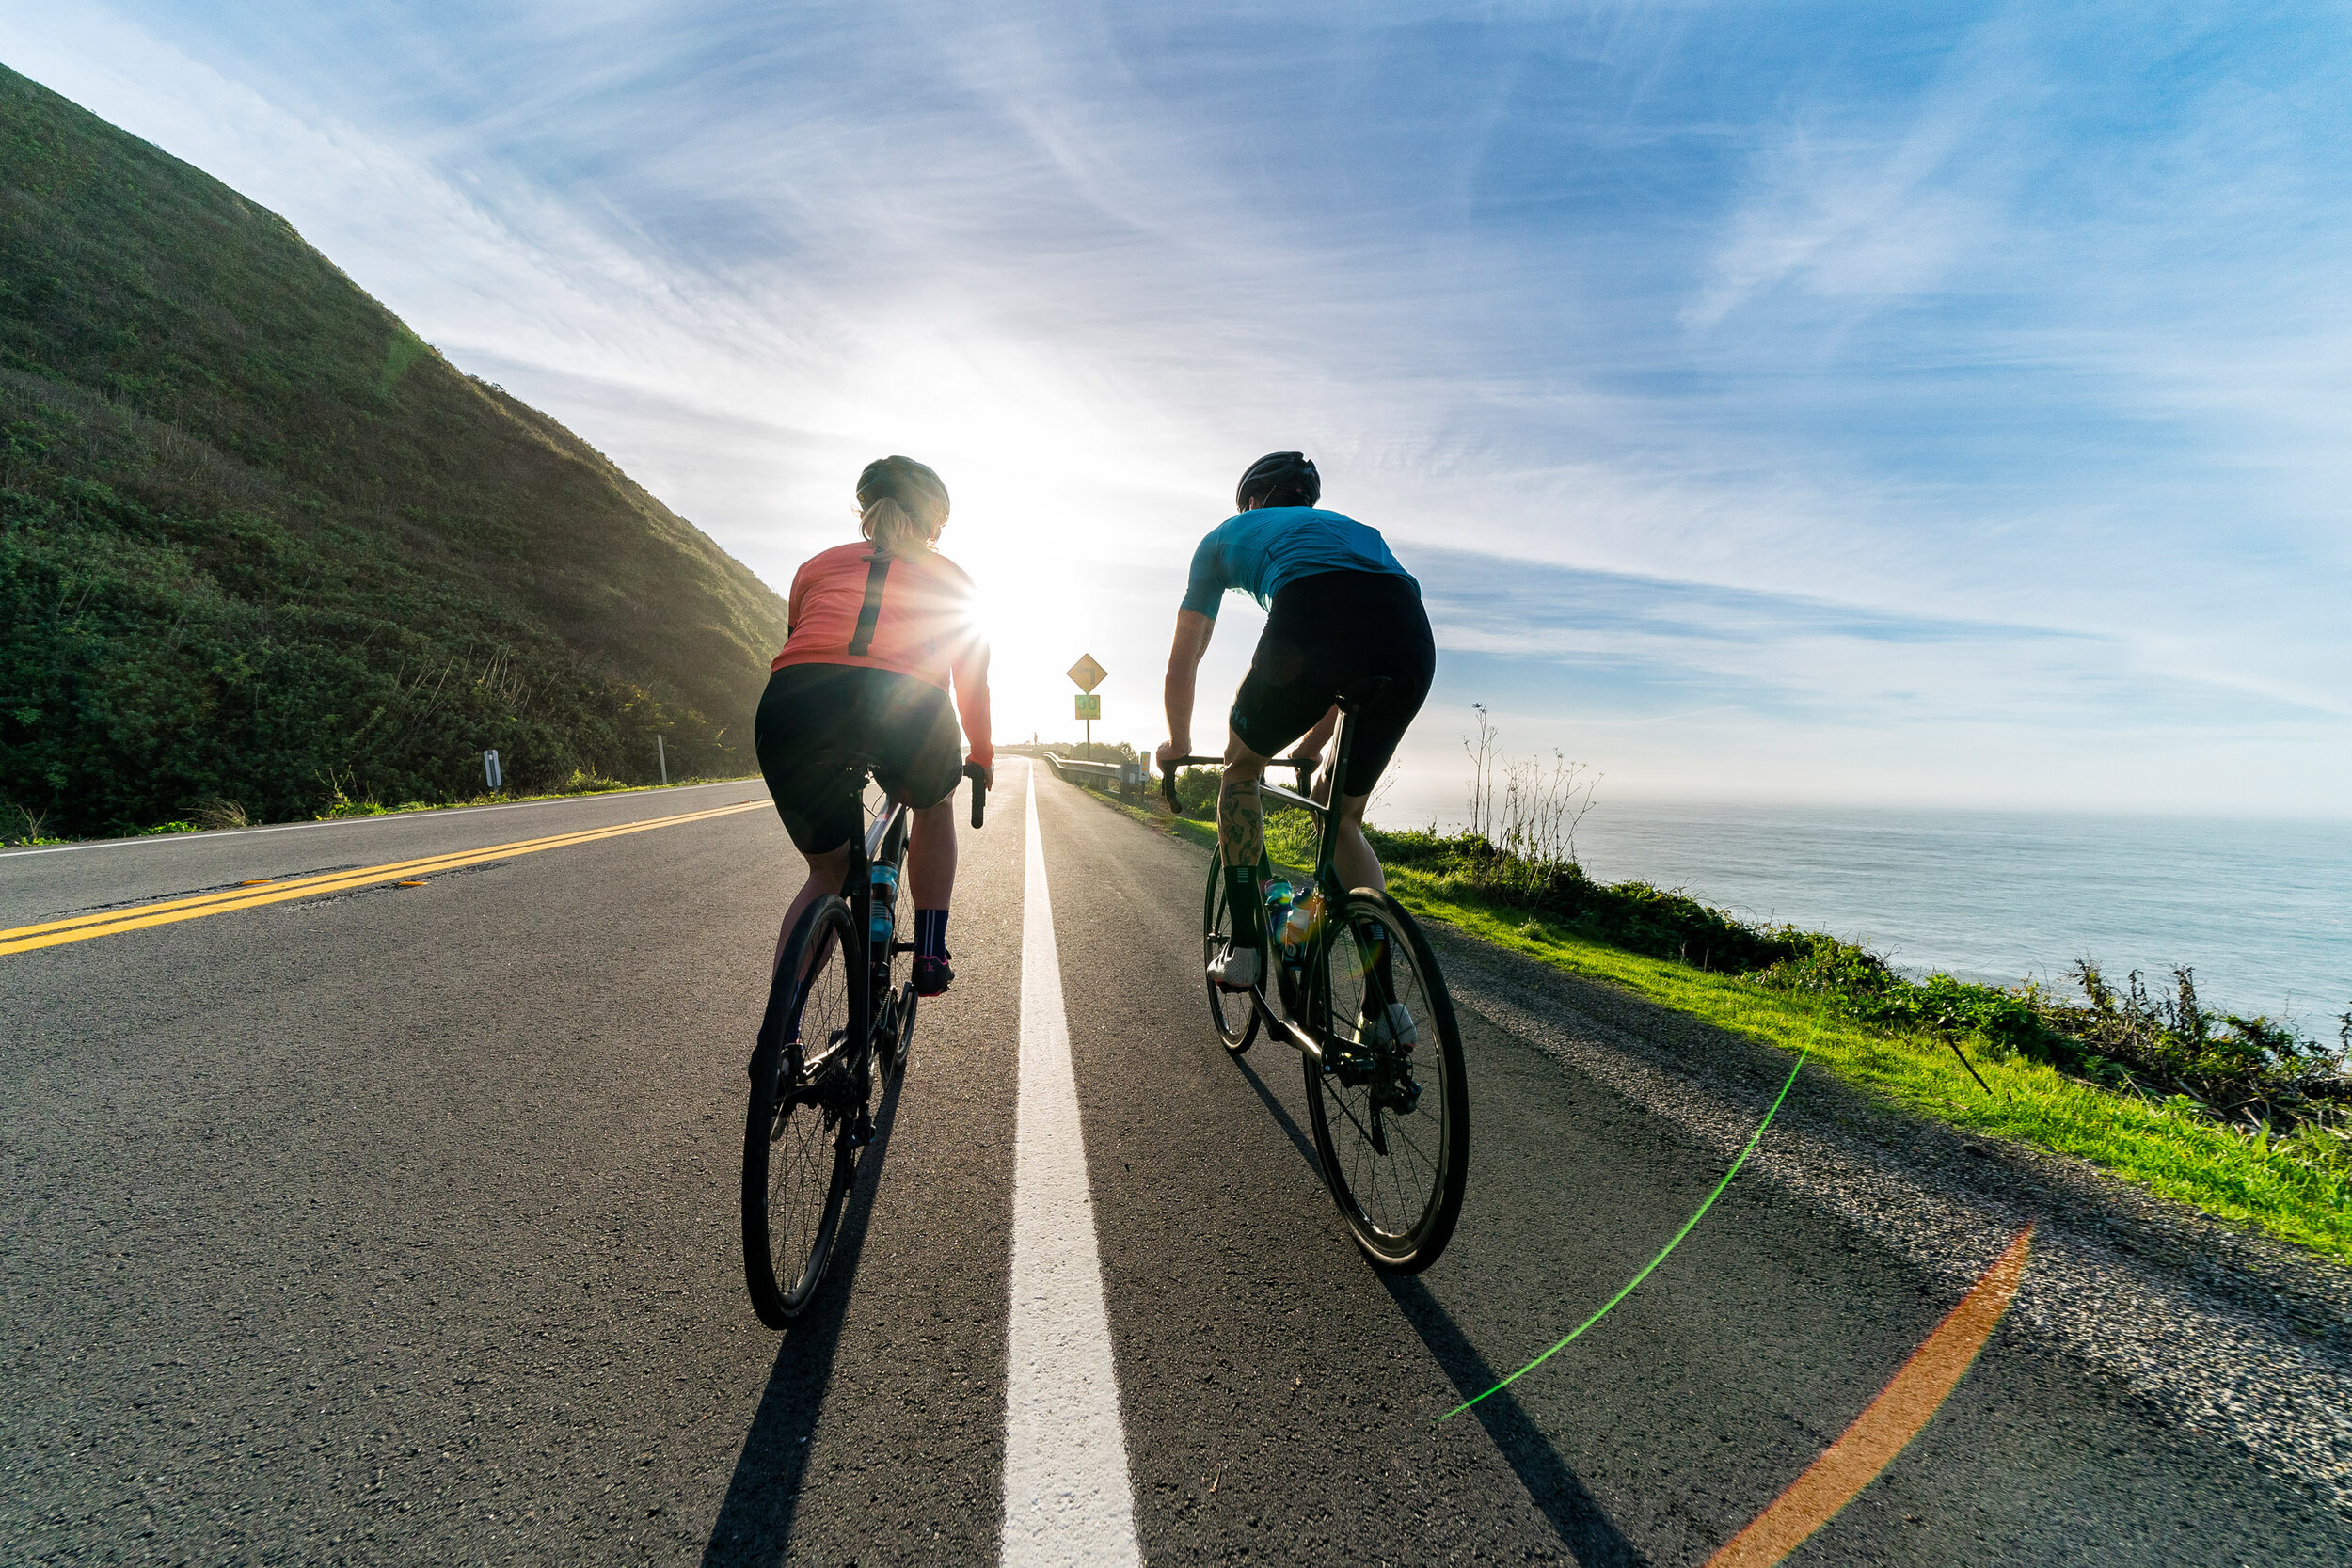  Adventure: Tyler Smith and Arielle Knutson road cycling along the Big Sur Coast, California 